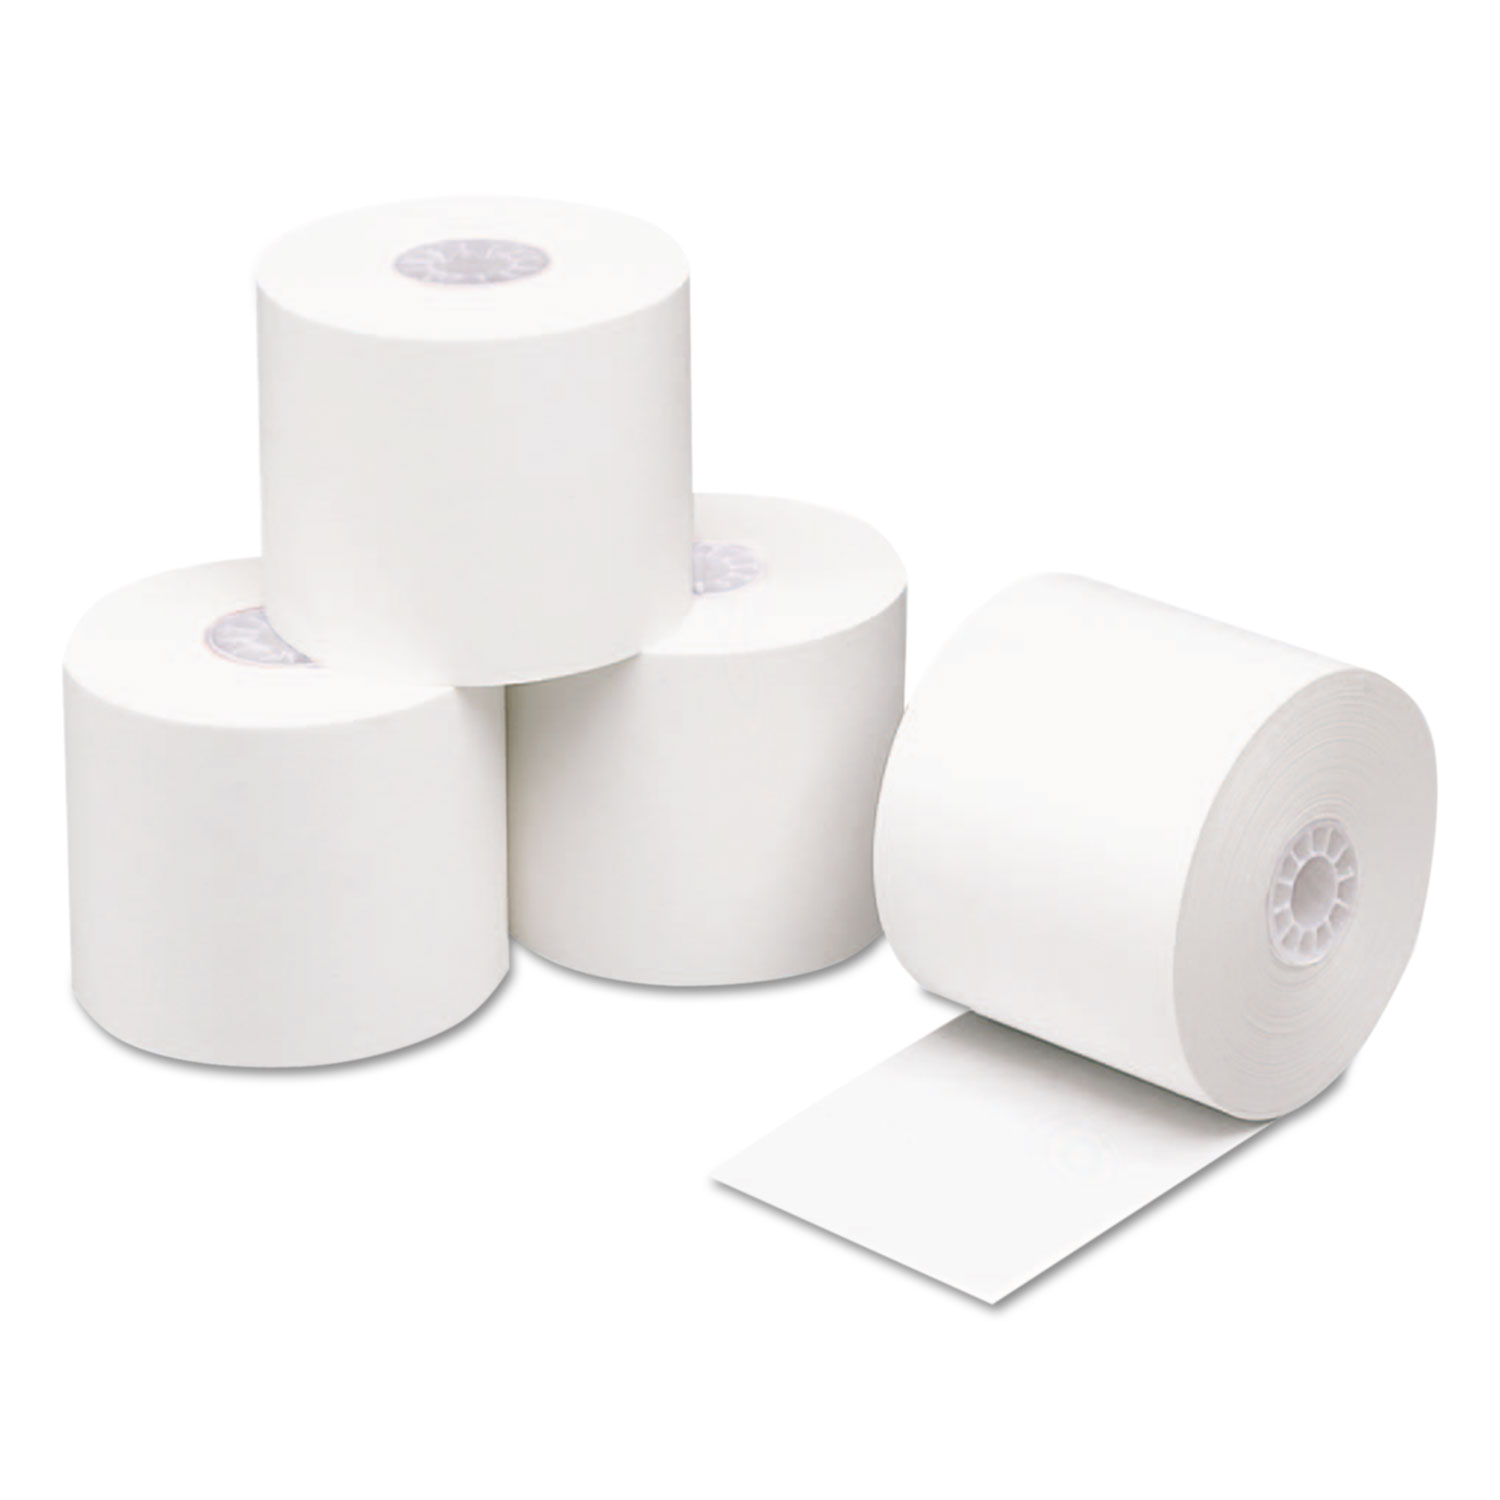 Direct Thermal Printing Thermal Paper Rolls, 2 1/4 x 400 ft., White, 24/Carton